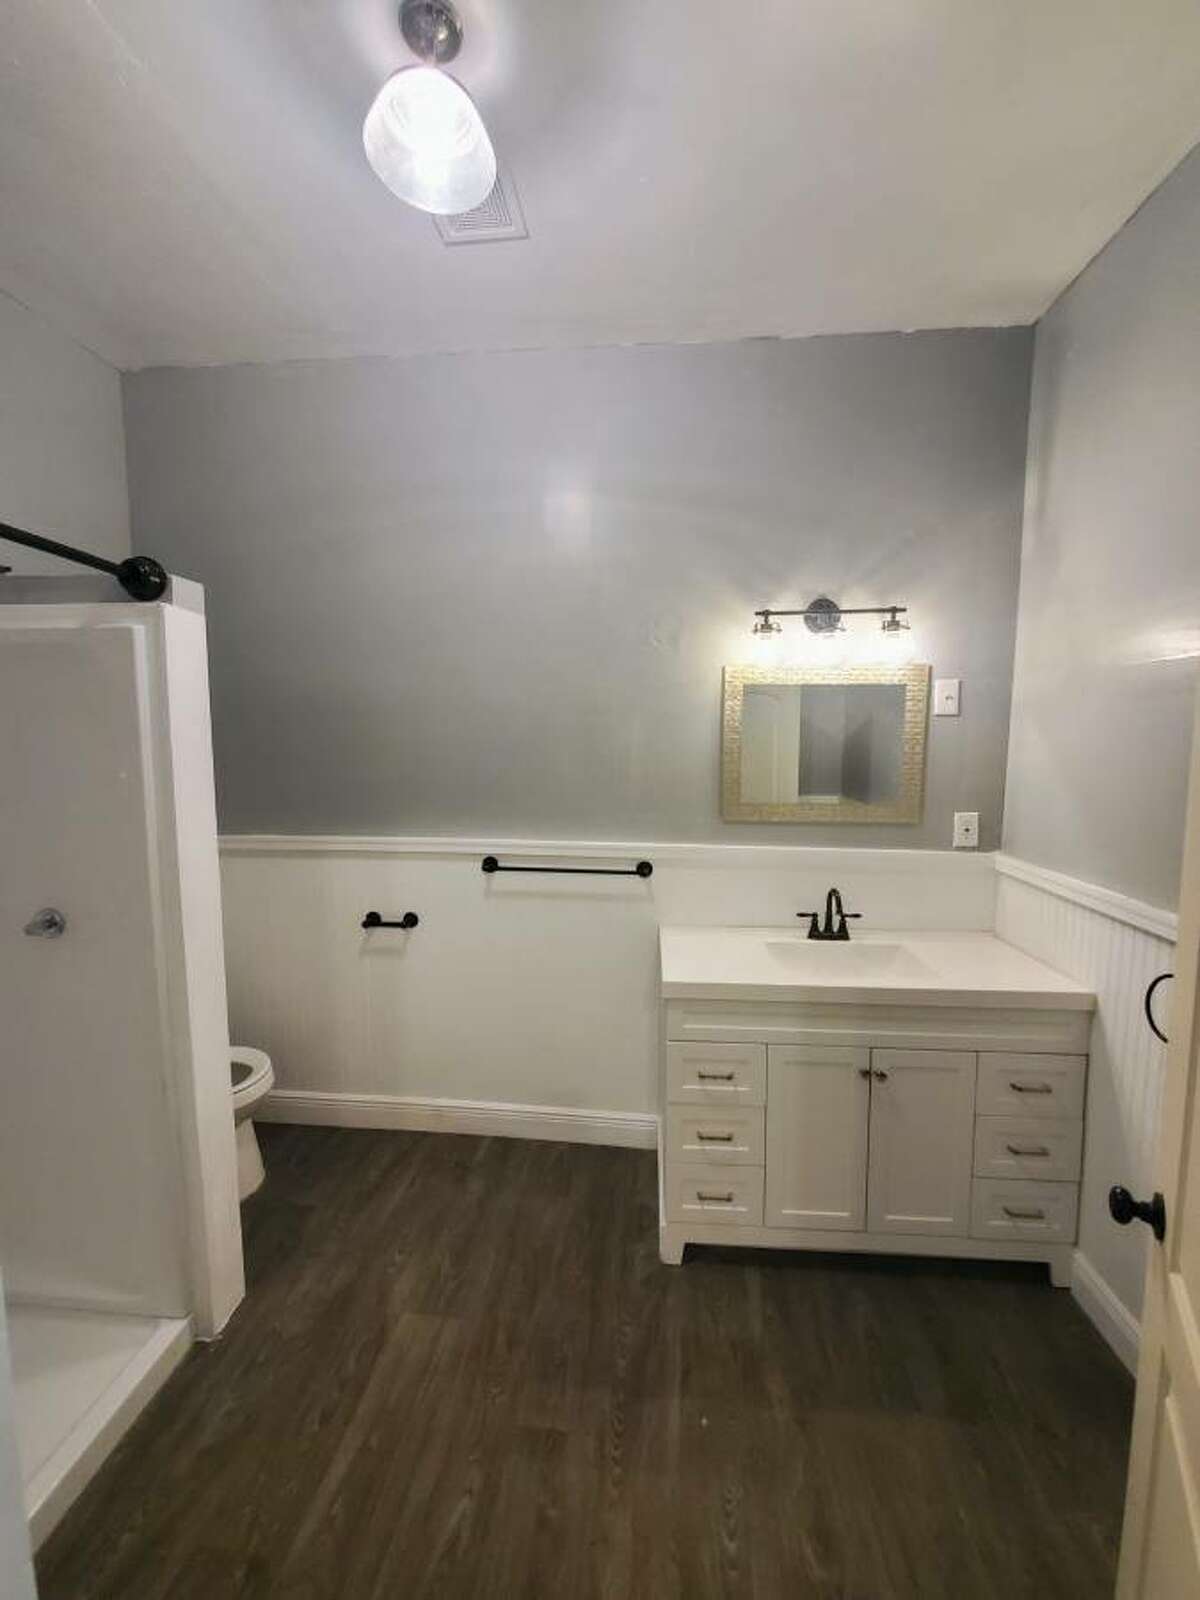 The upstairs bathroom is a little larger than the downstairs bathroom and includes a walk-in shower. 